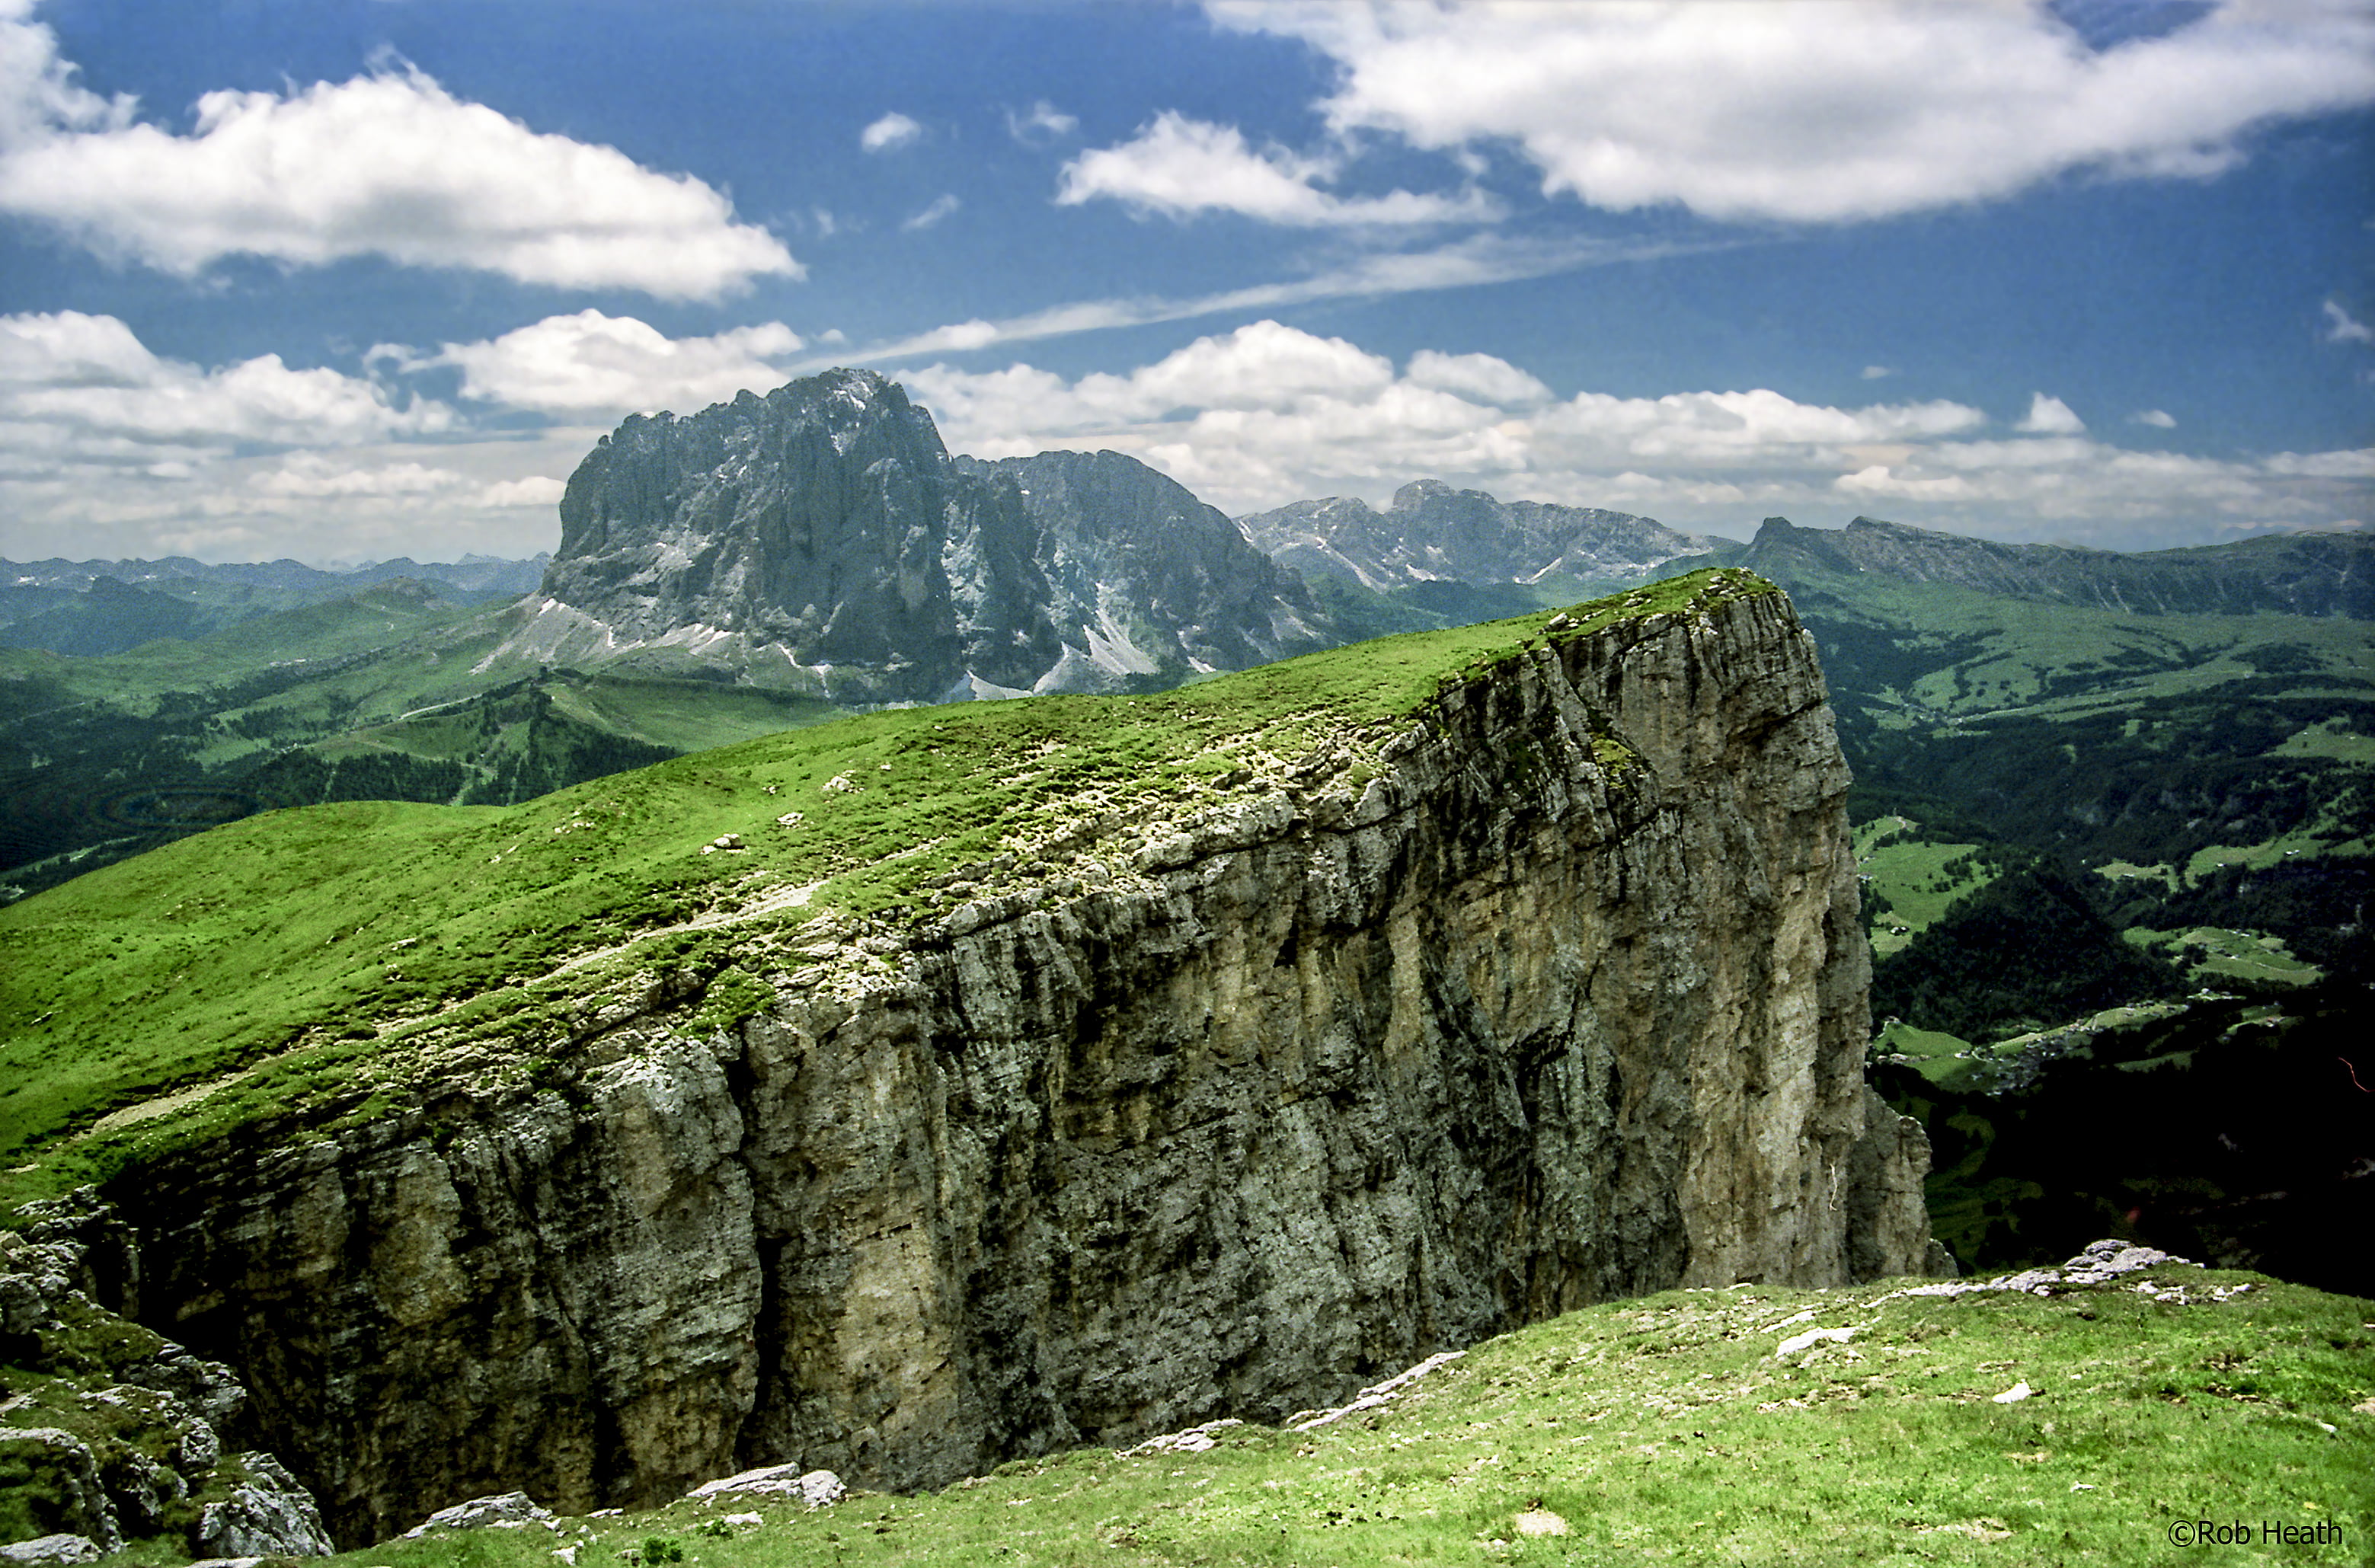 grassy stone cliffs across cloudy mountains during daytime